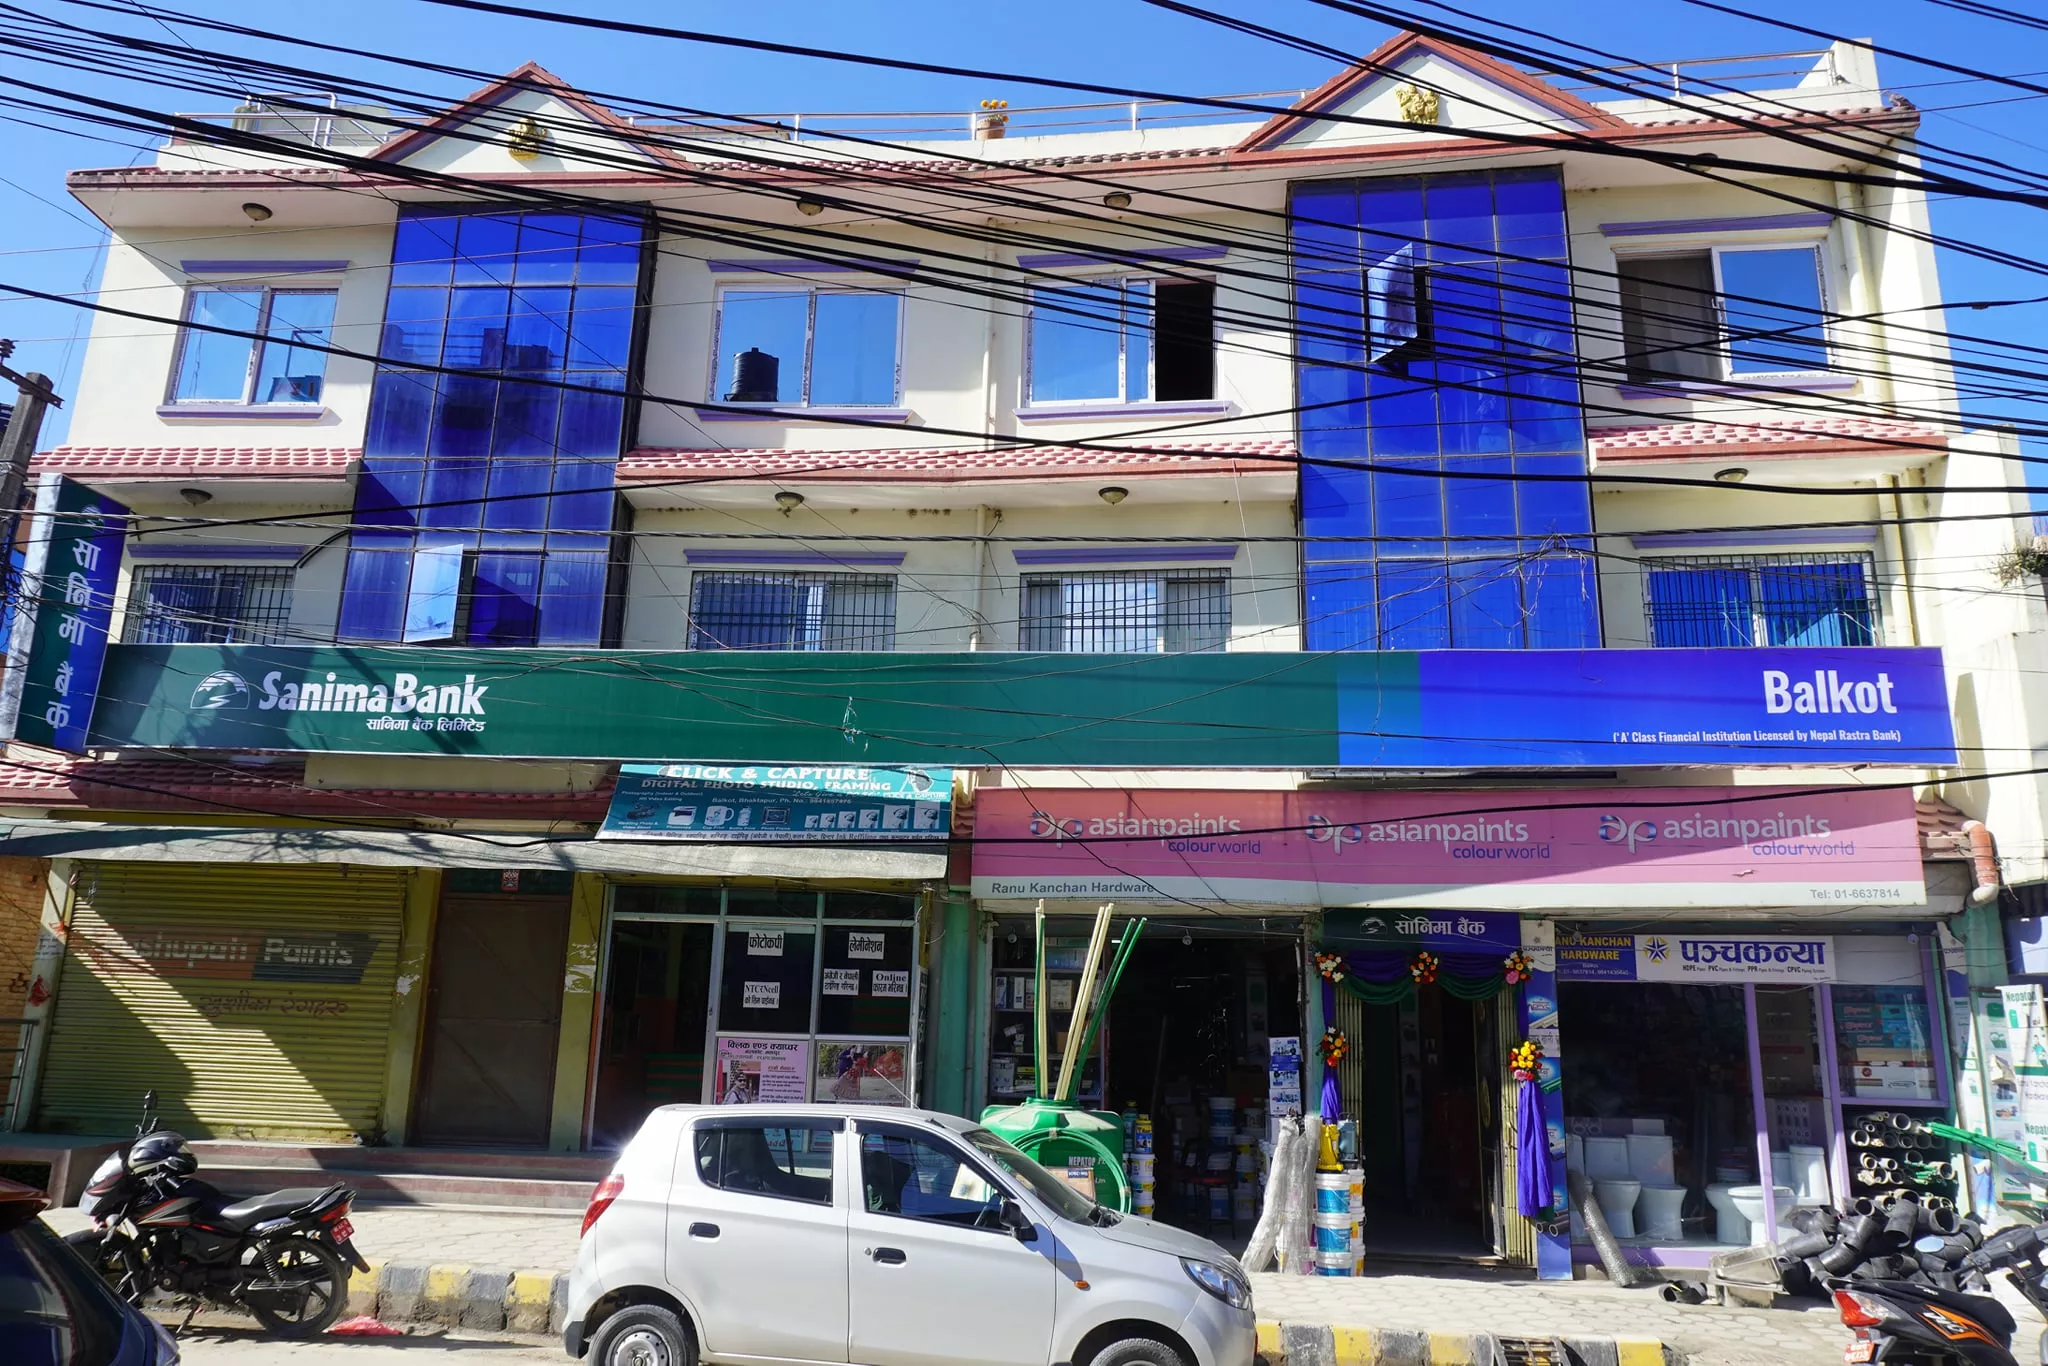 Sanima Bank adds Branch Office in Balkot of Bhaktapur District